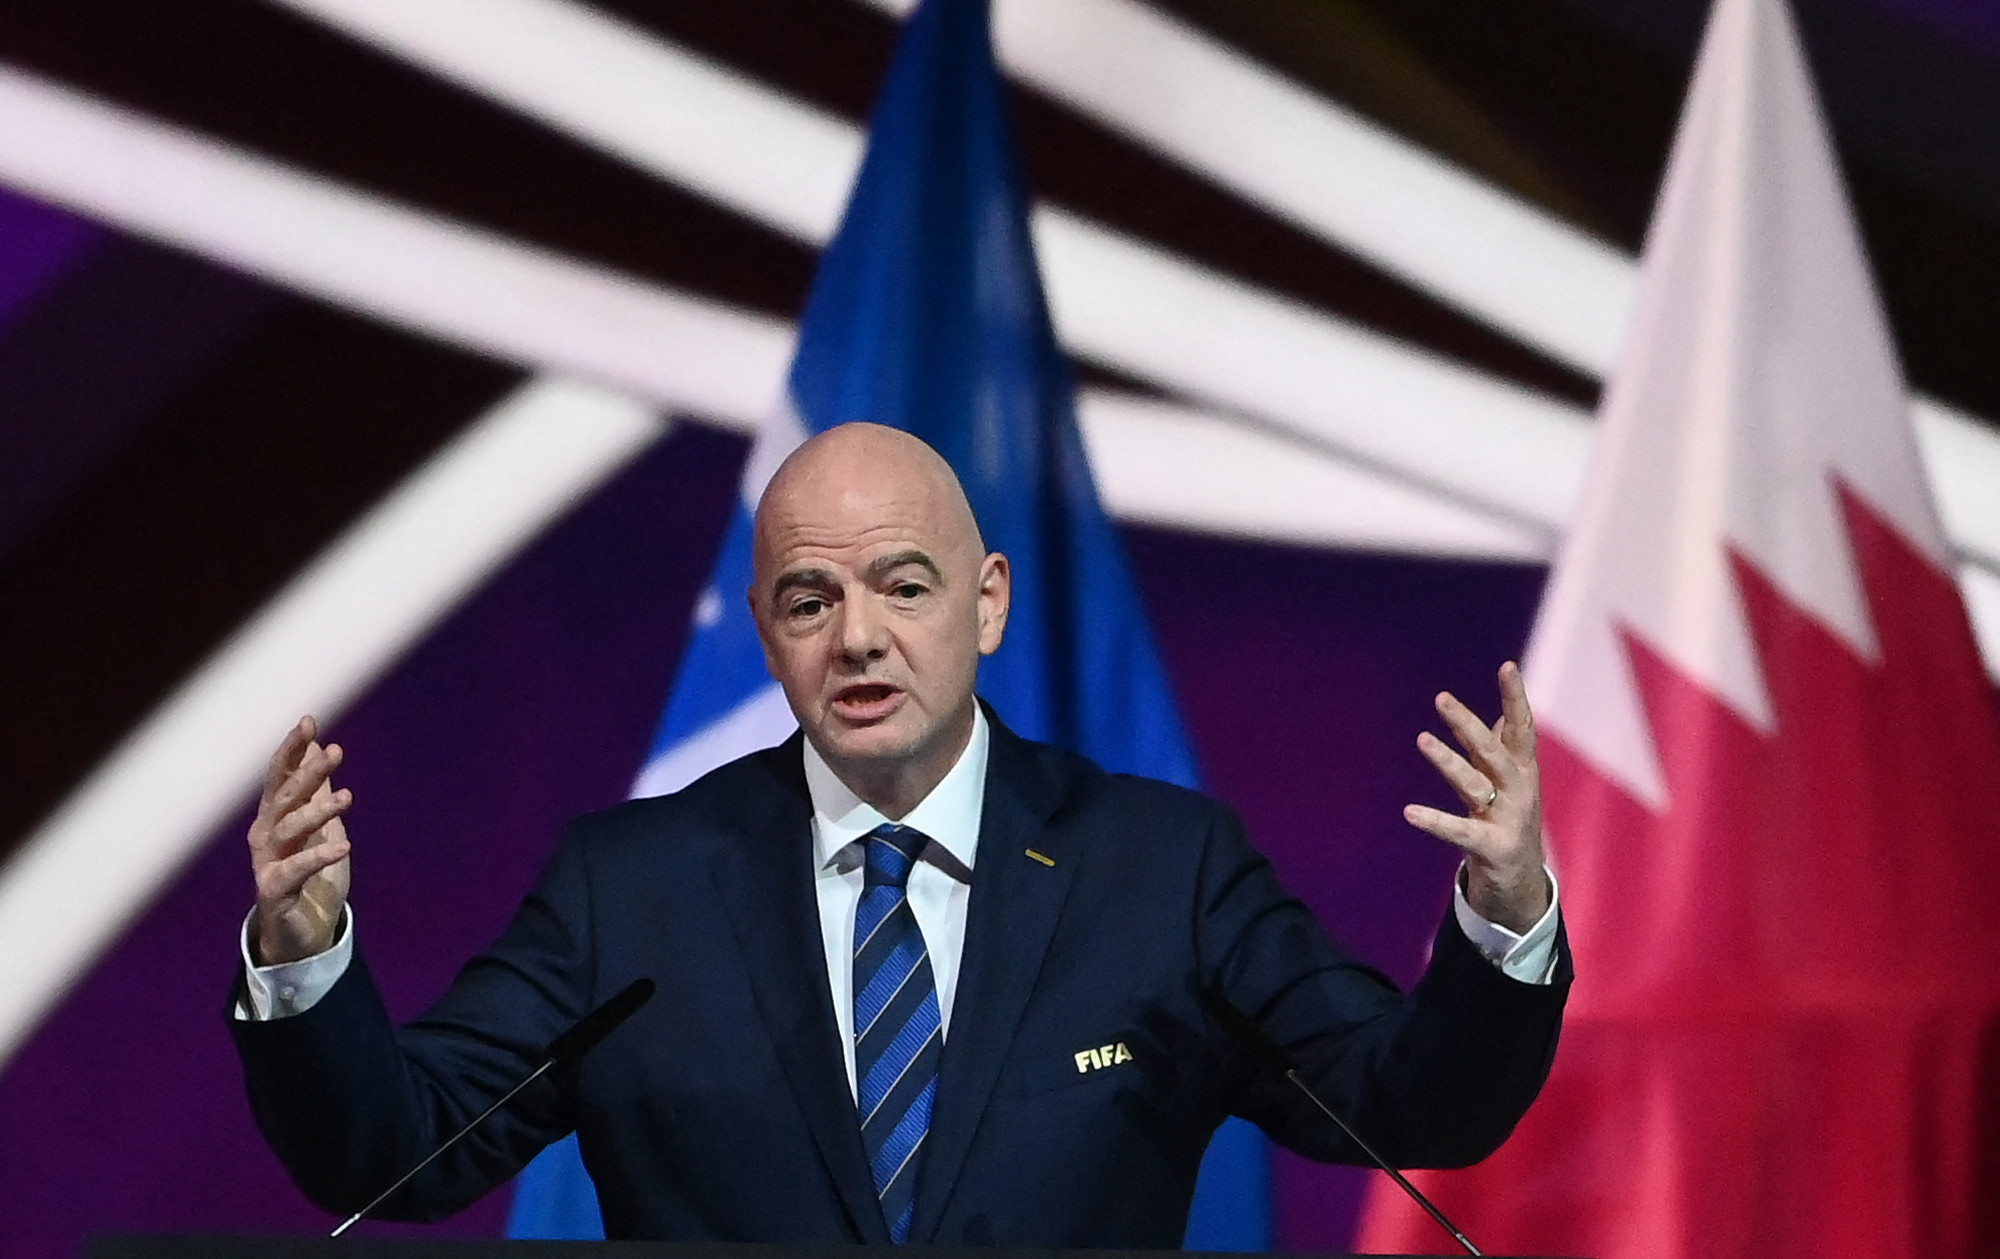 FIFA President Gianni Infantino suggested FIFA "has not proposed a biennial World Cup" ©Getty Images